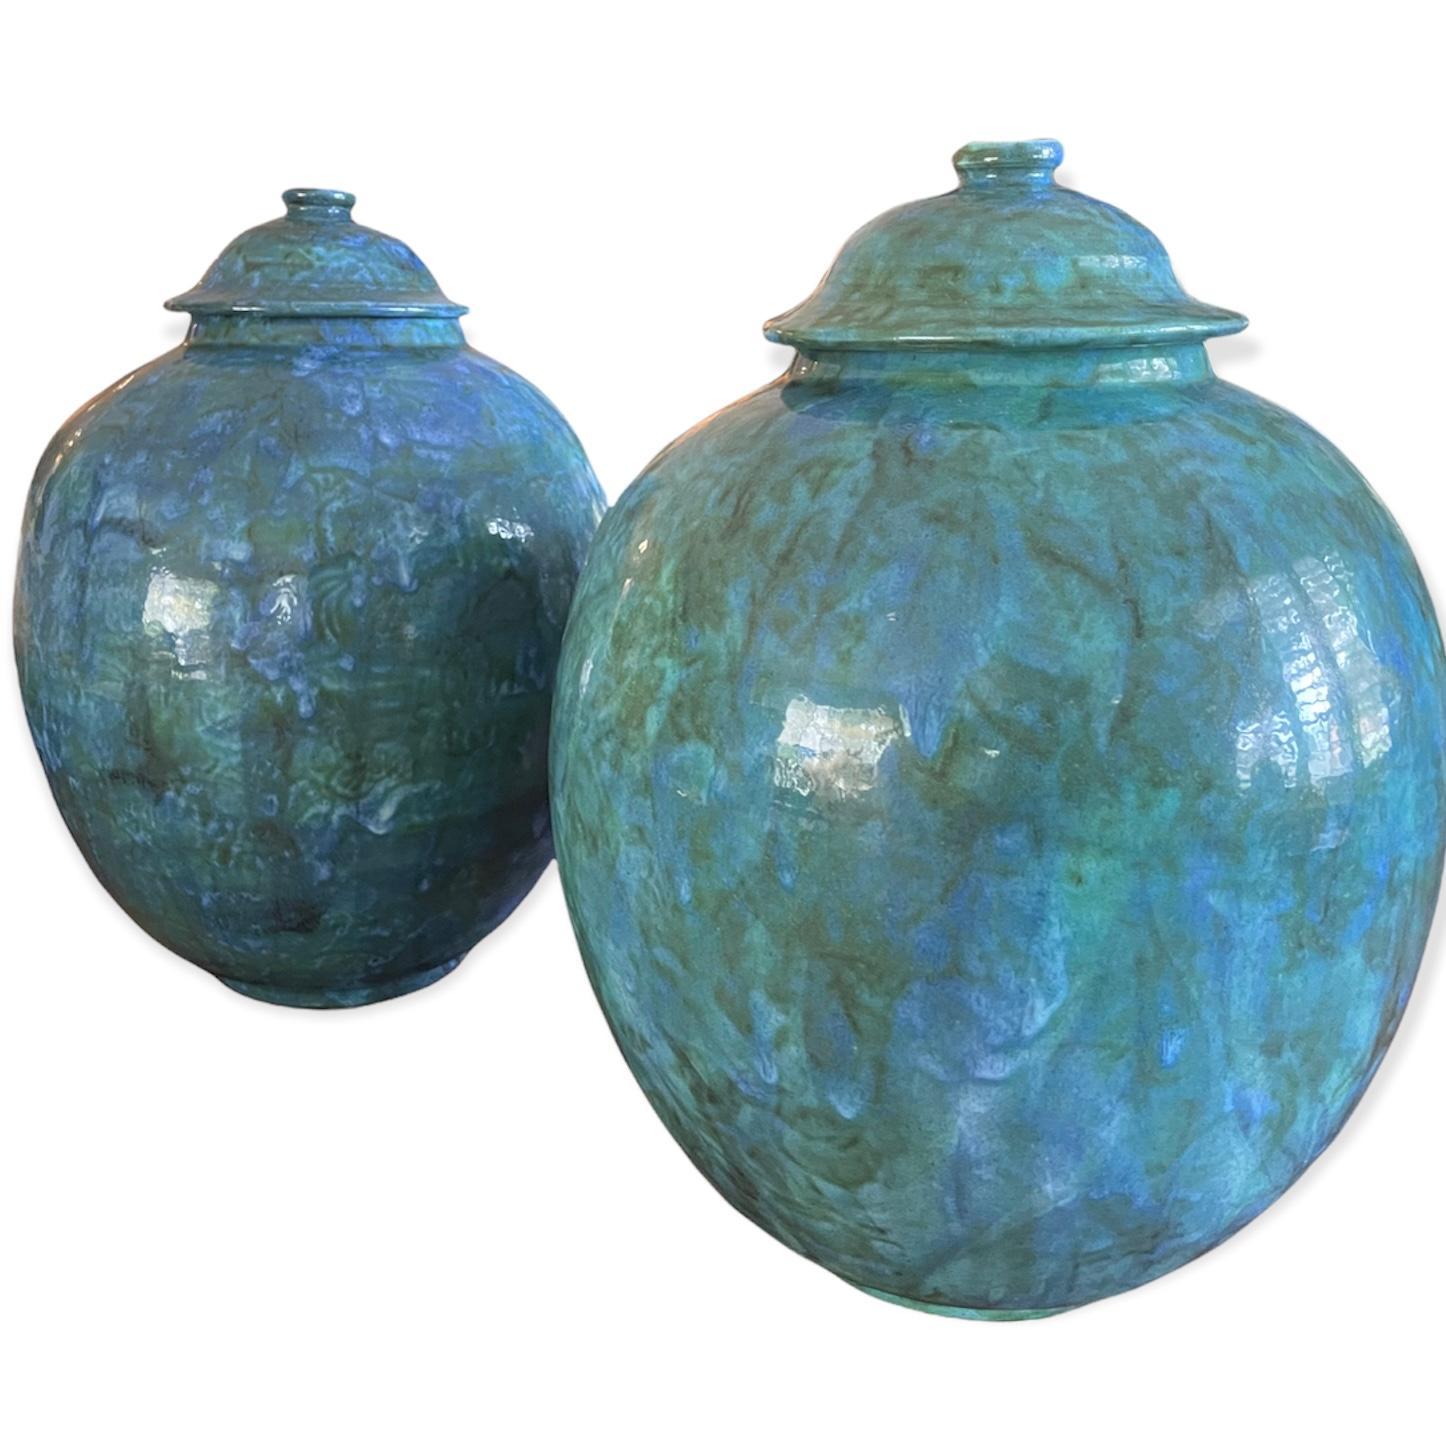 Circa 1968 Pottery Queen of Palm Beach, This pair is a show stopper, it was believed that these were the last consignment if pottery of this type. Dodie was know for Lettuce-ware. What is so cool is they are both signed by Dodie herself and are a